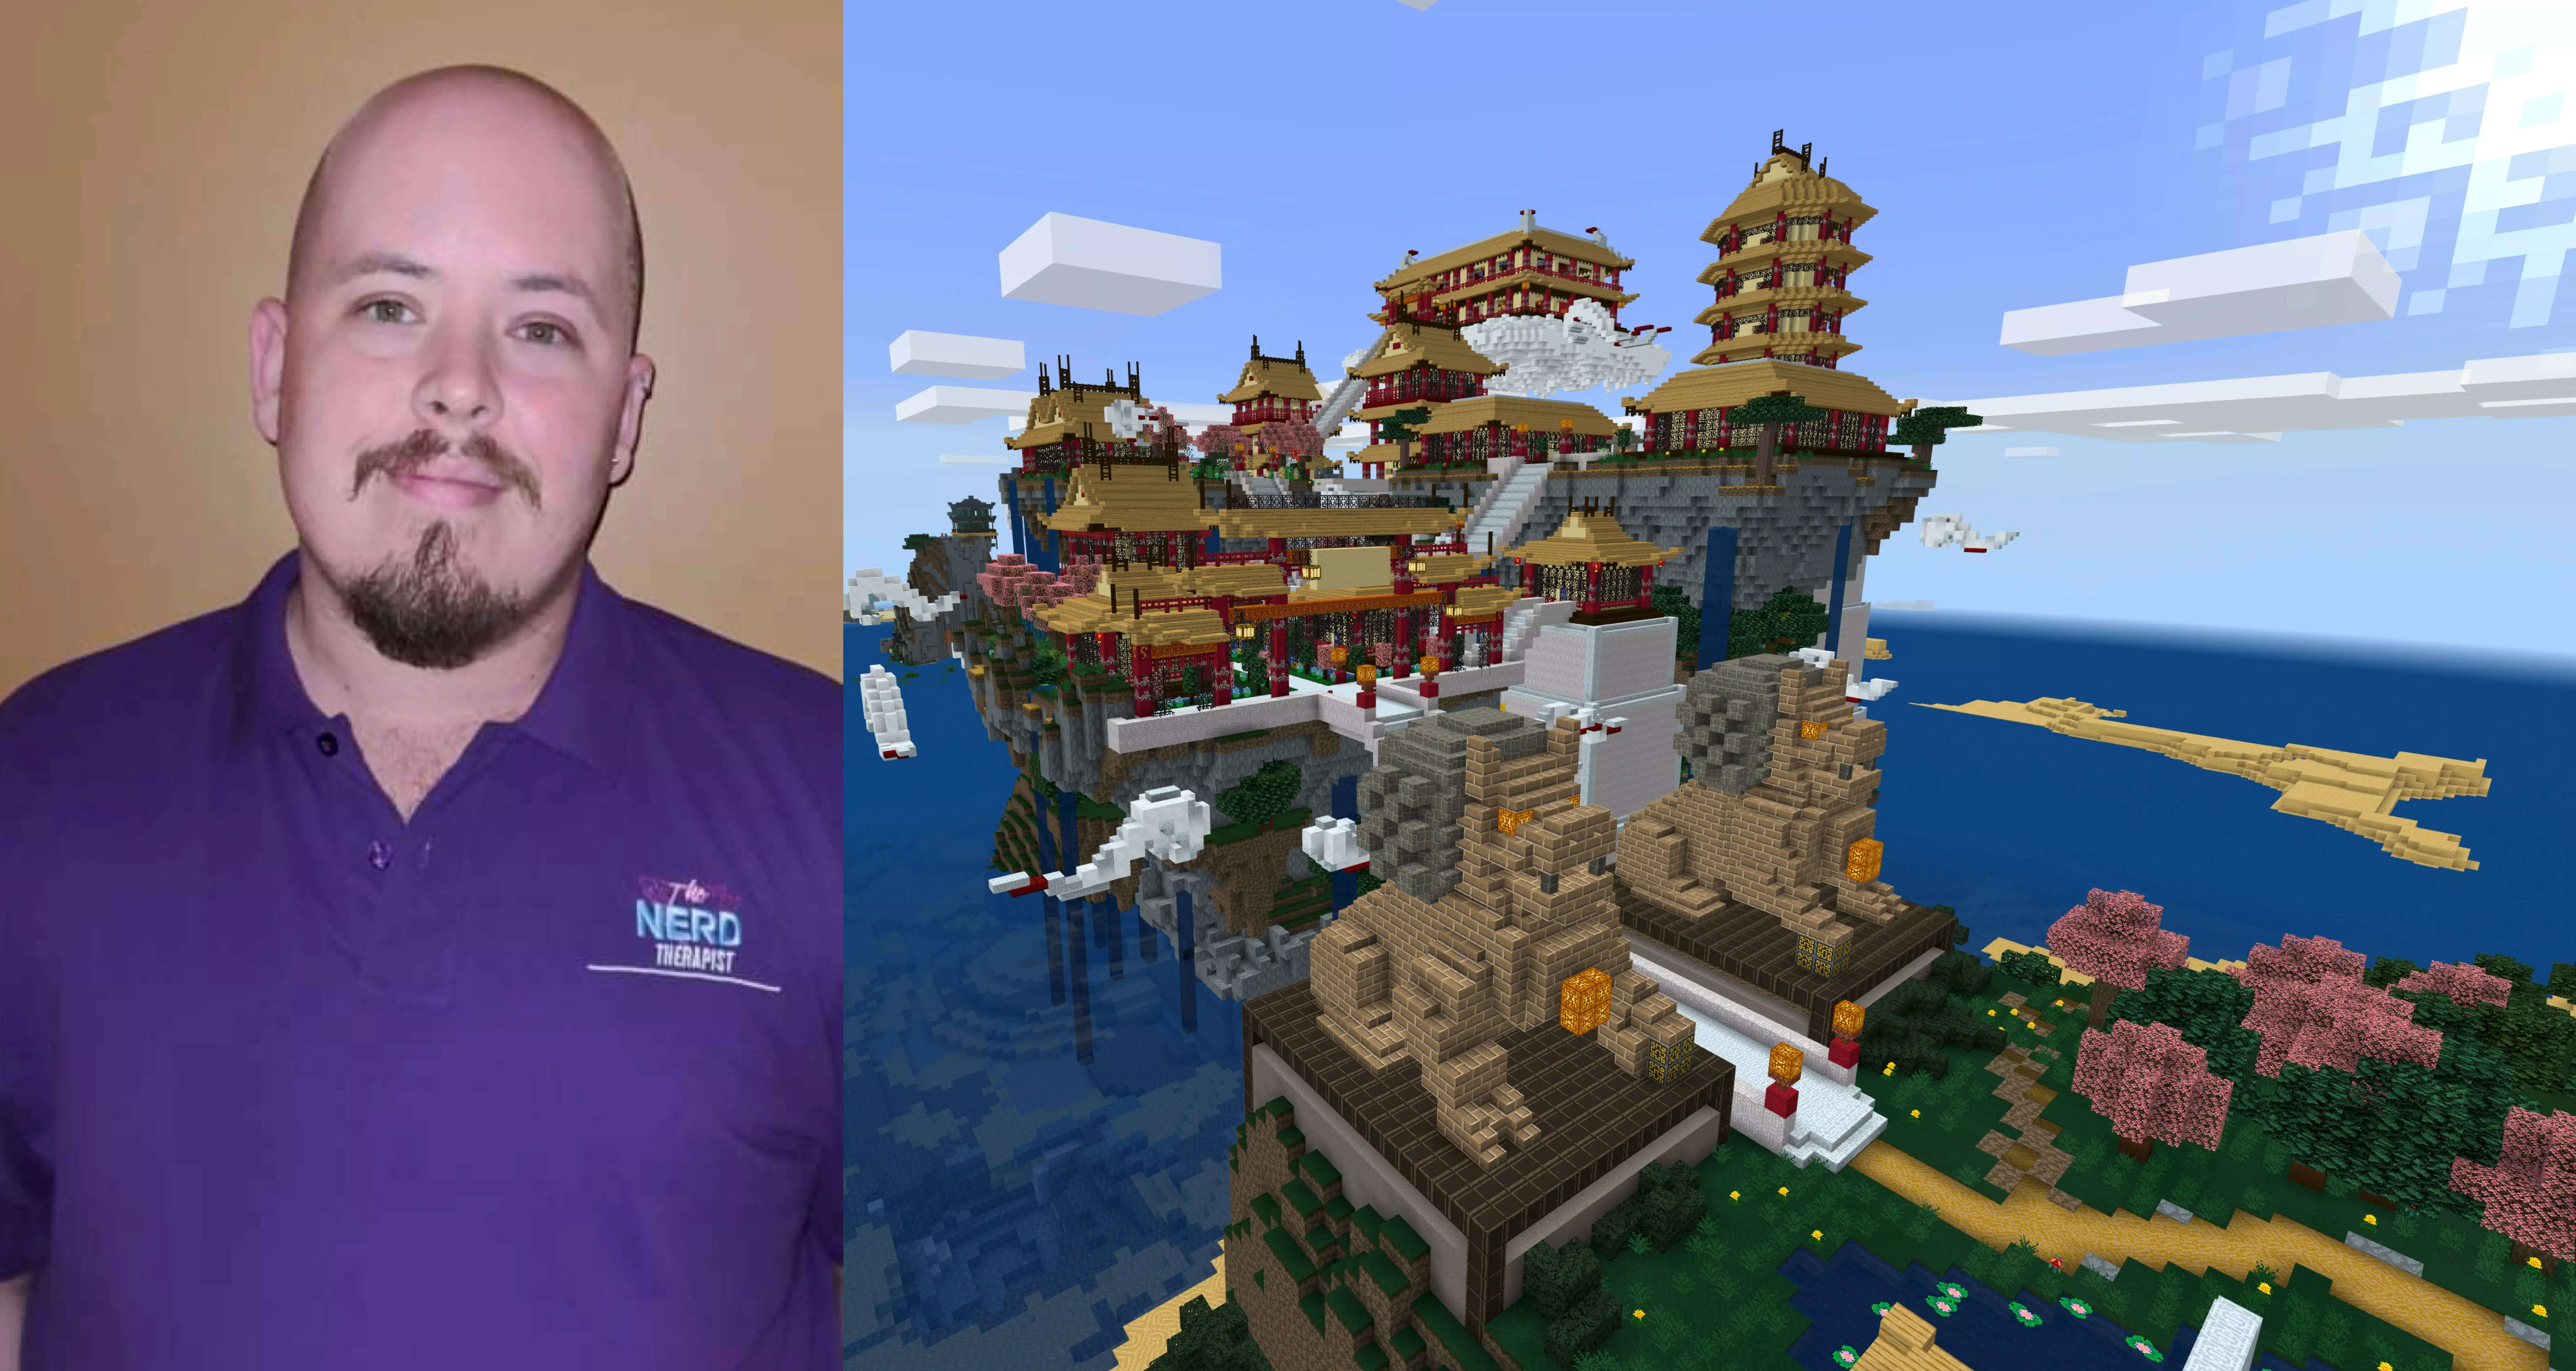 
This therapist uses games like 'Minecraft' to treat patients — and he's trying to make the method catch on
